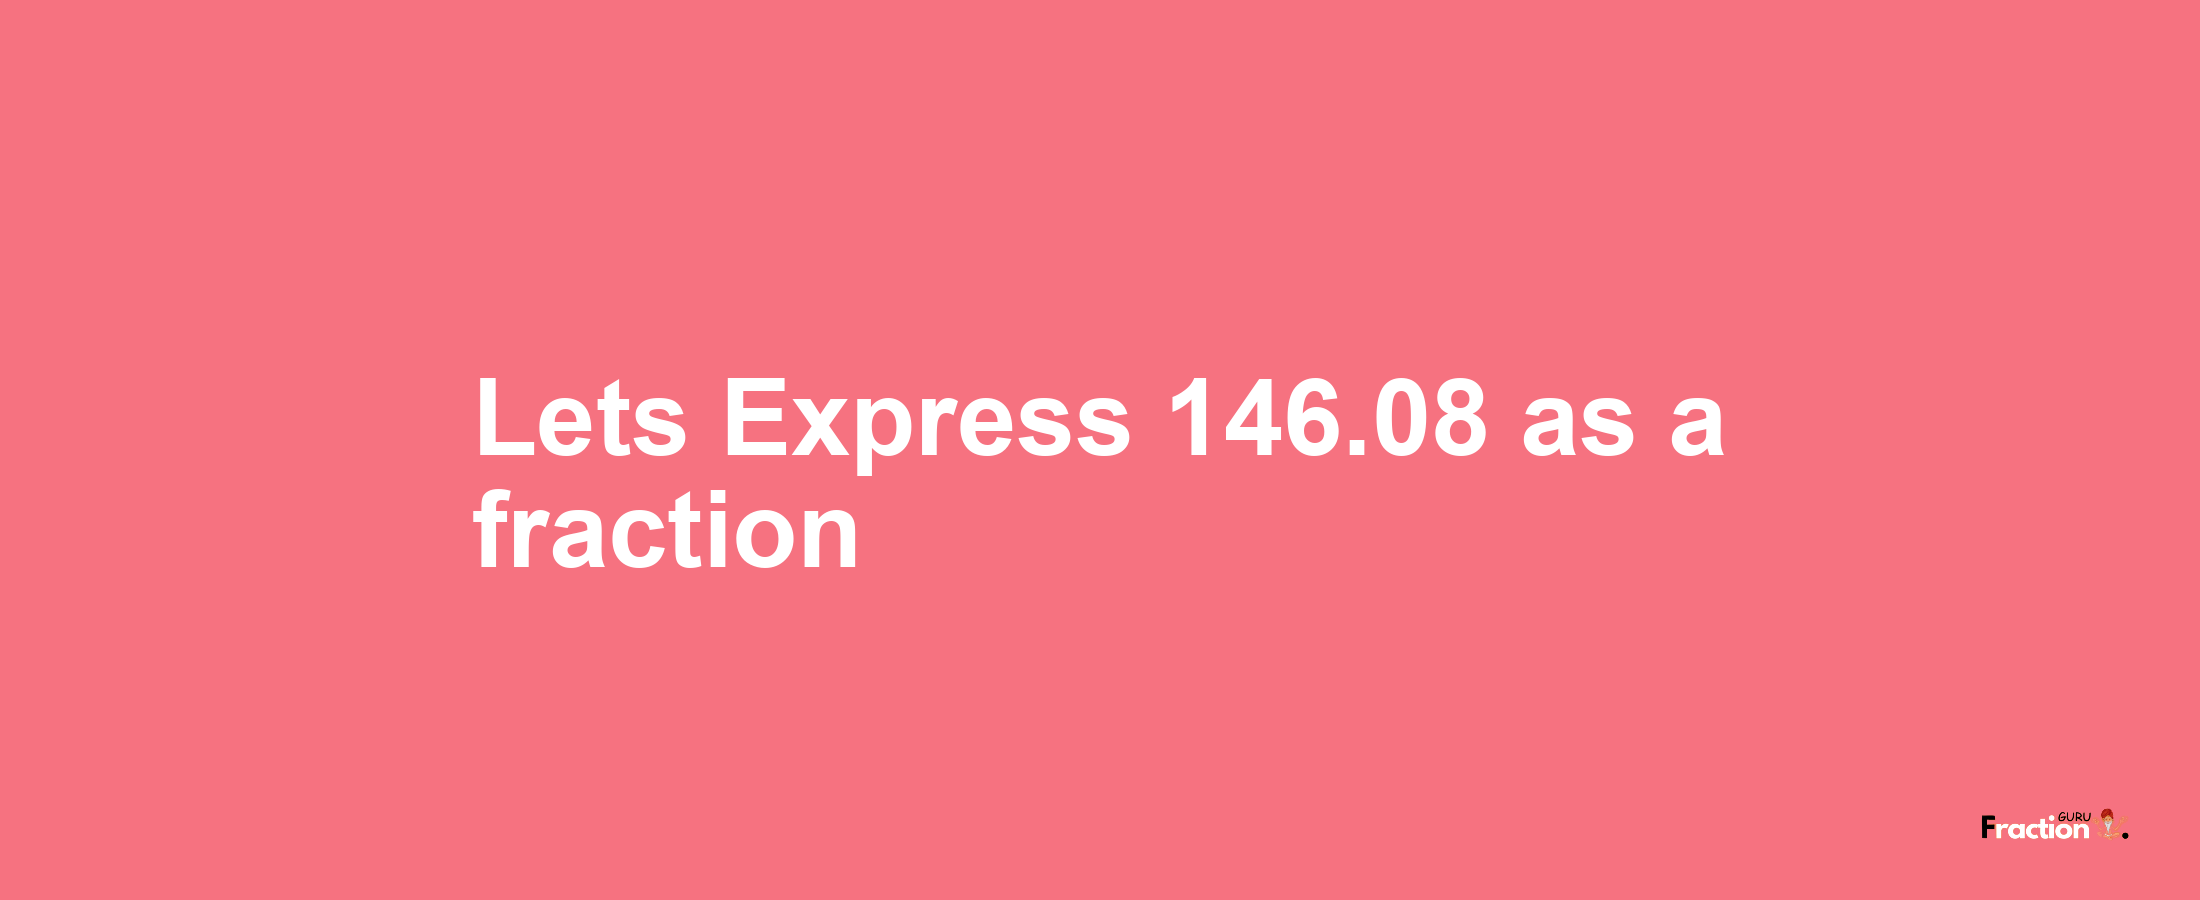 Lets Express 146.08 as afraction